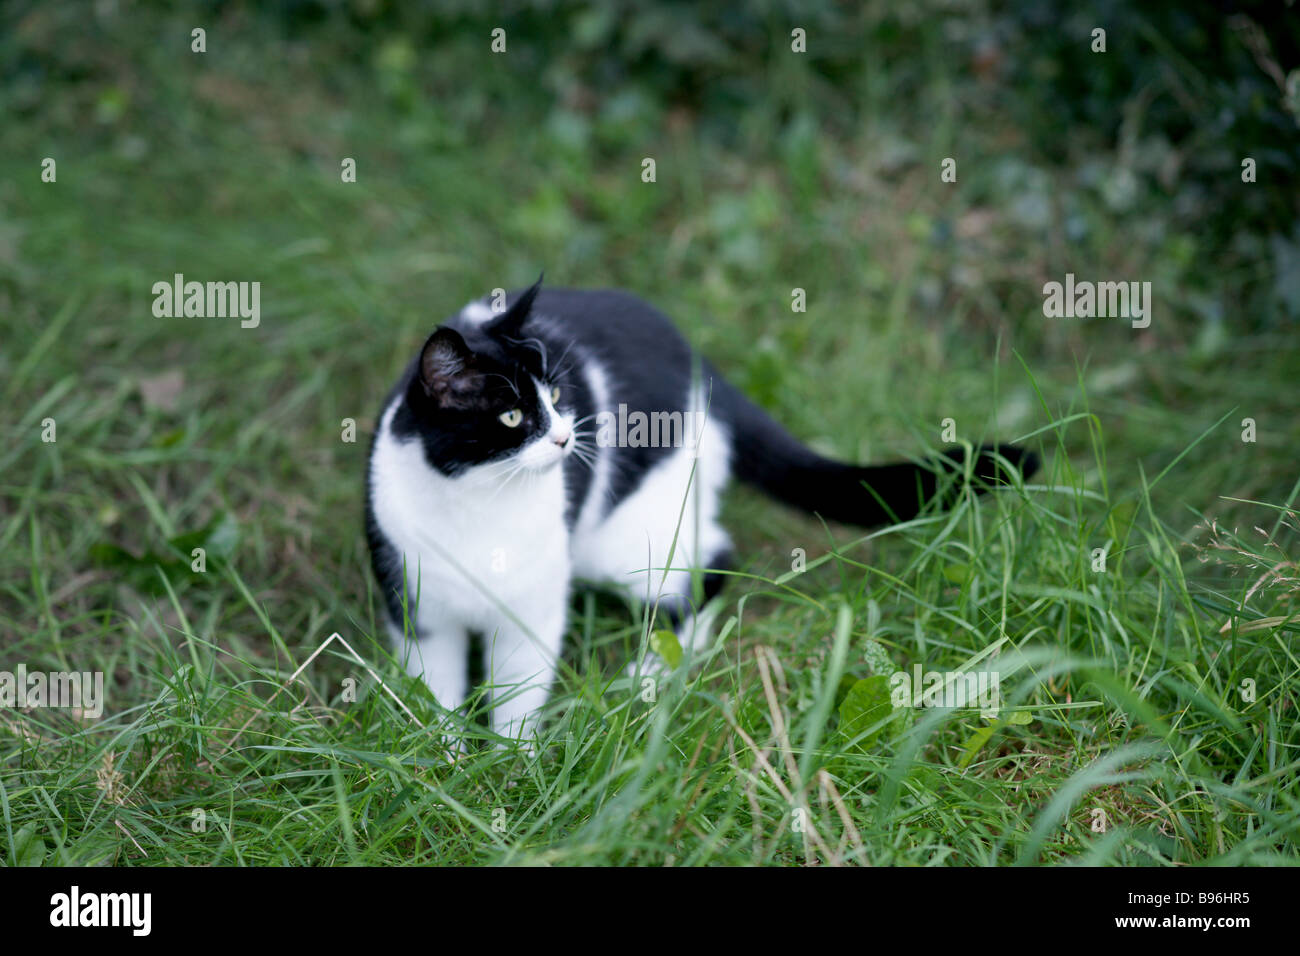 Cat on the move Stock Photo